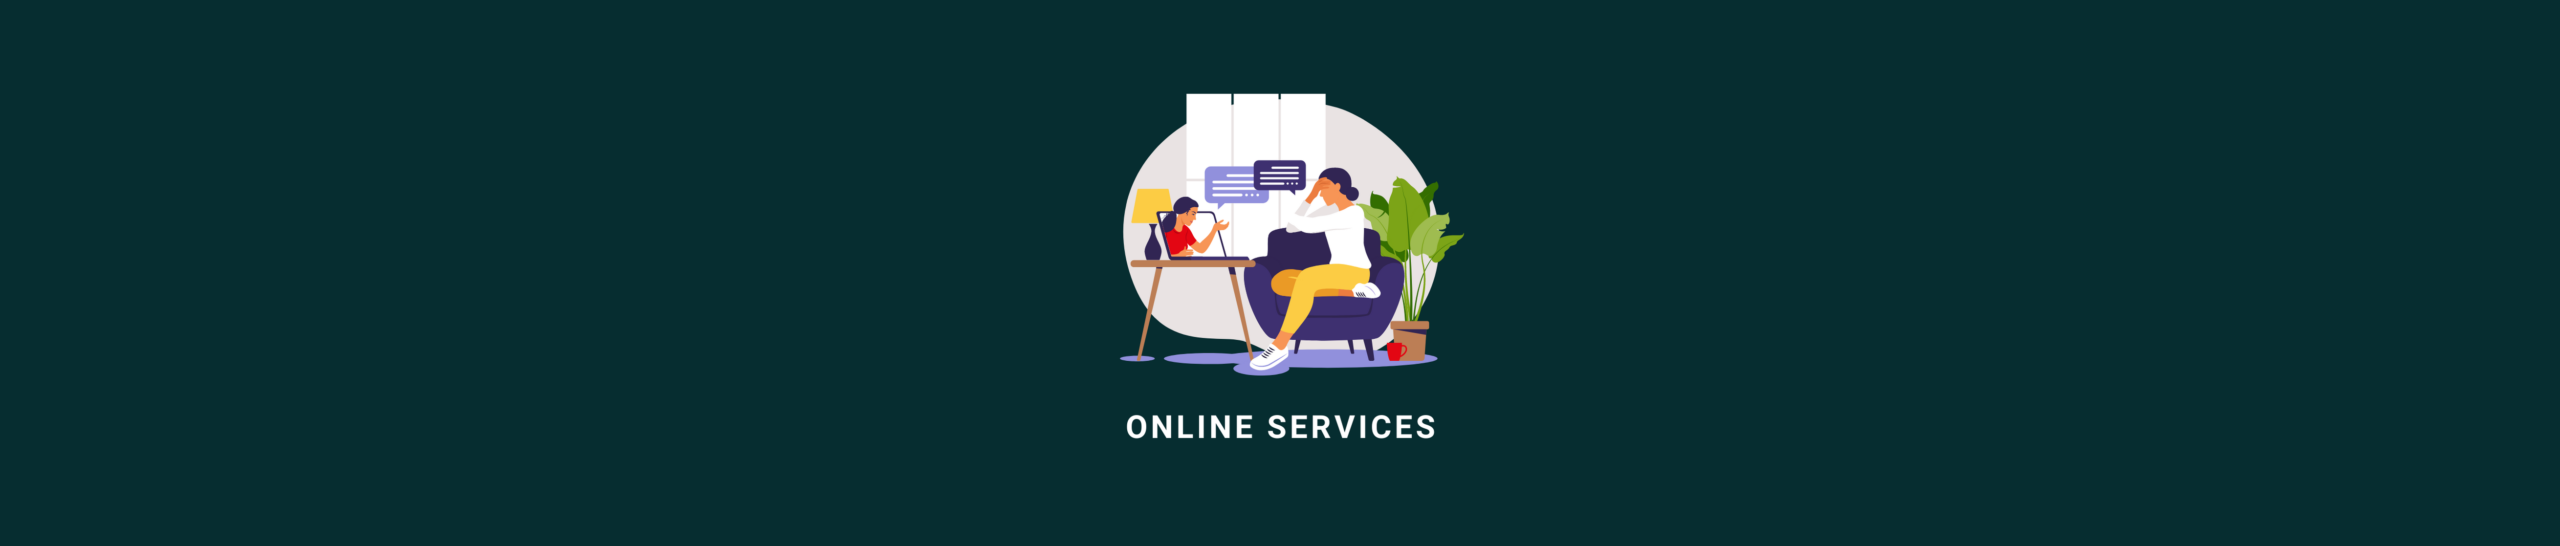 Online Services - Kalpalatha Thiyagarajan Kalm Wellness Centre and Counselling Services